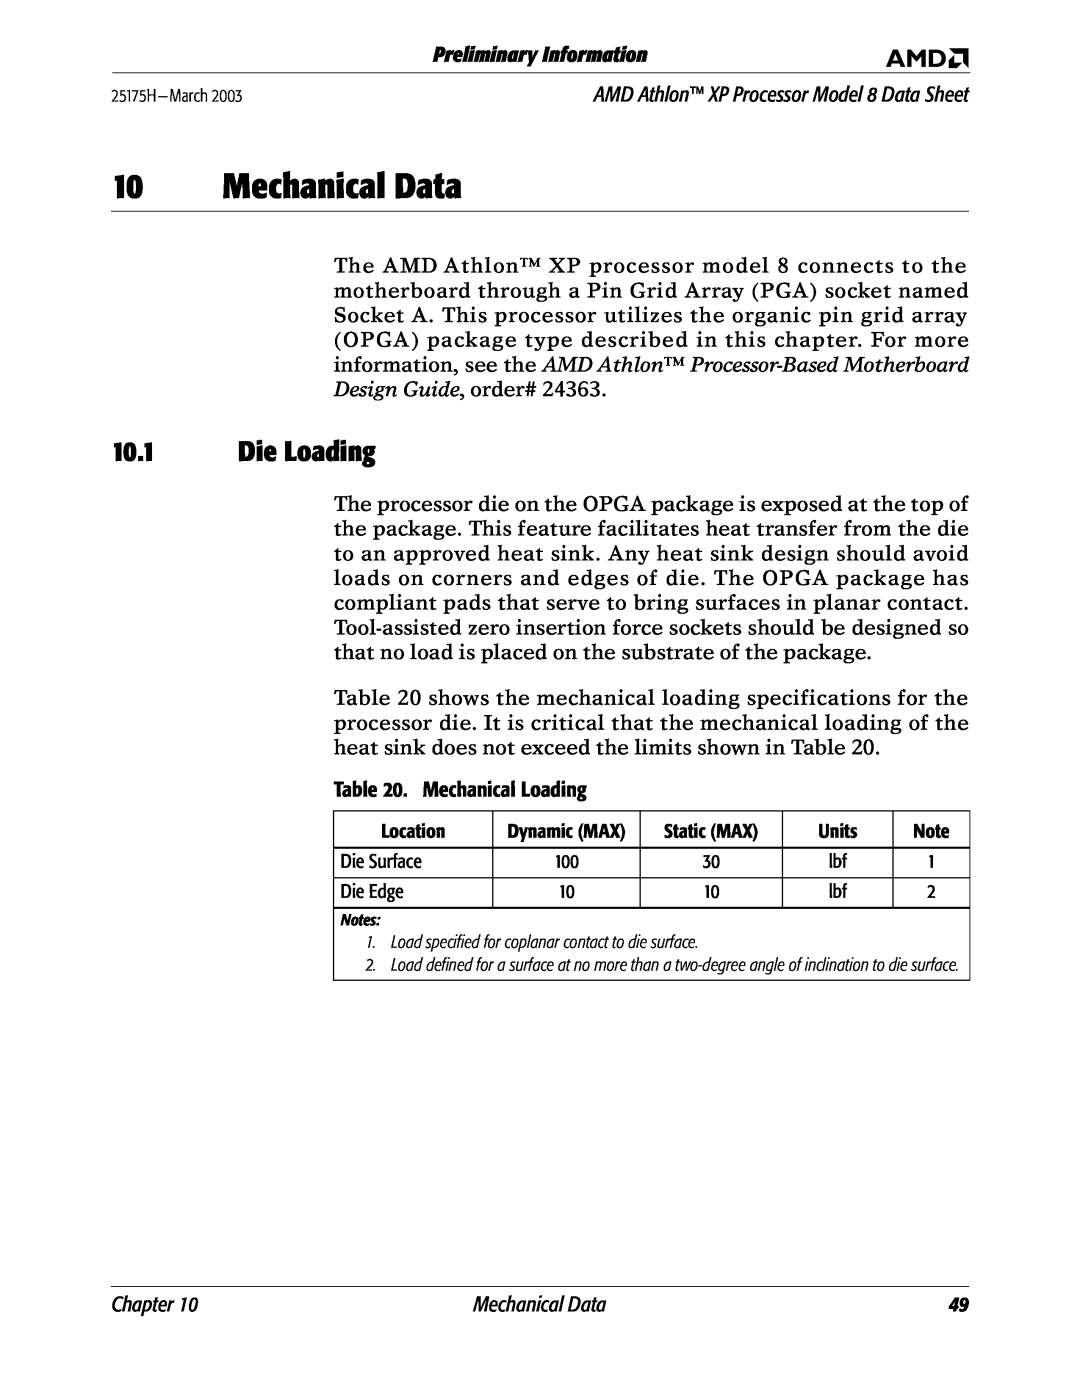 AMD 8 manual Mechanical Data, Die Loading, Preliminary Information, Chapter 